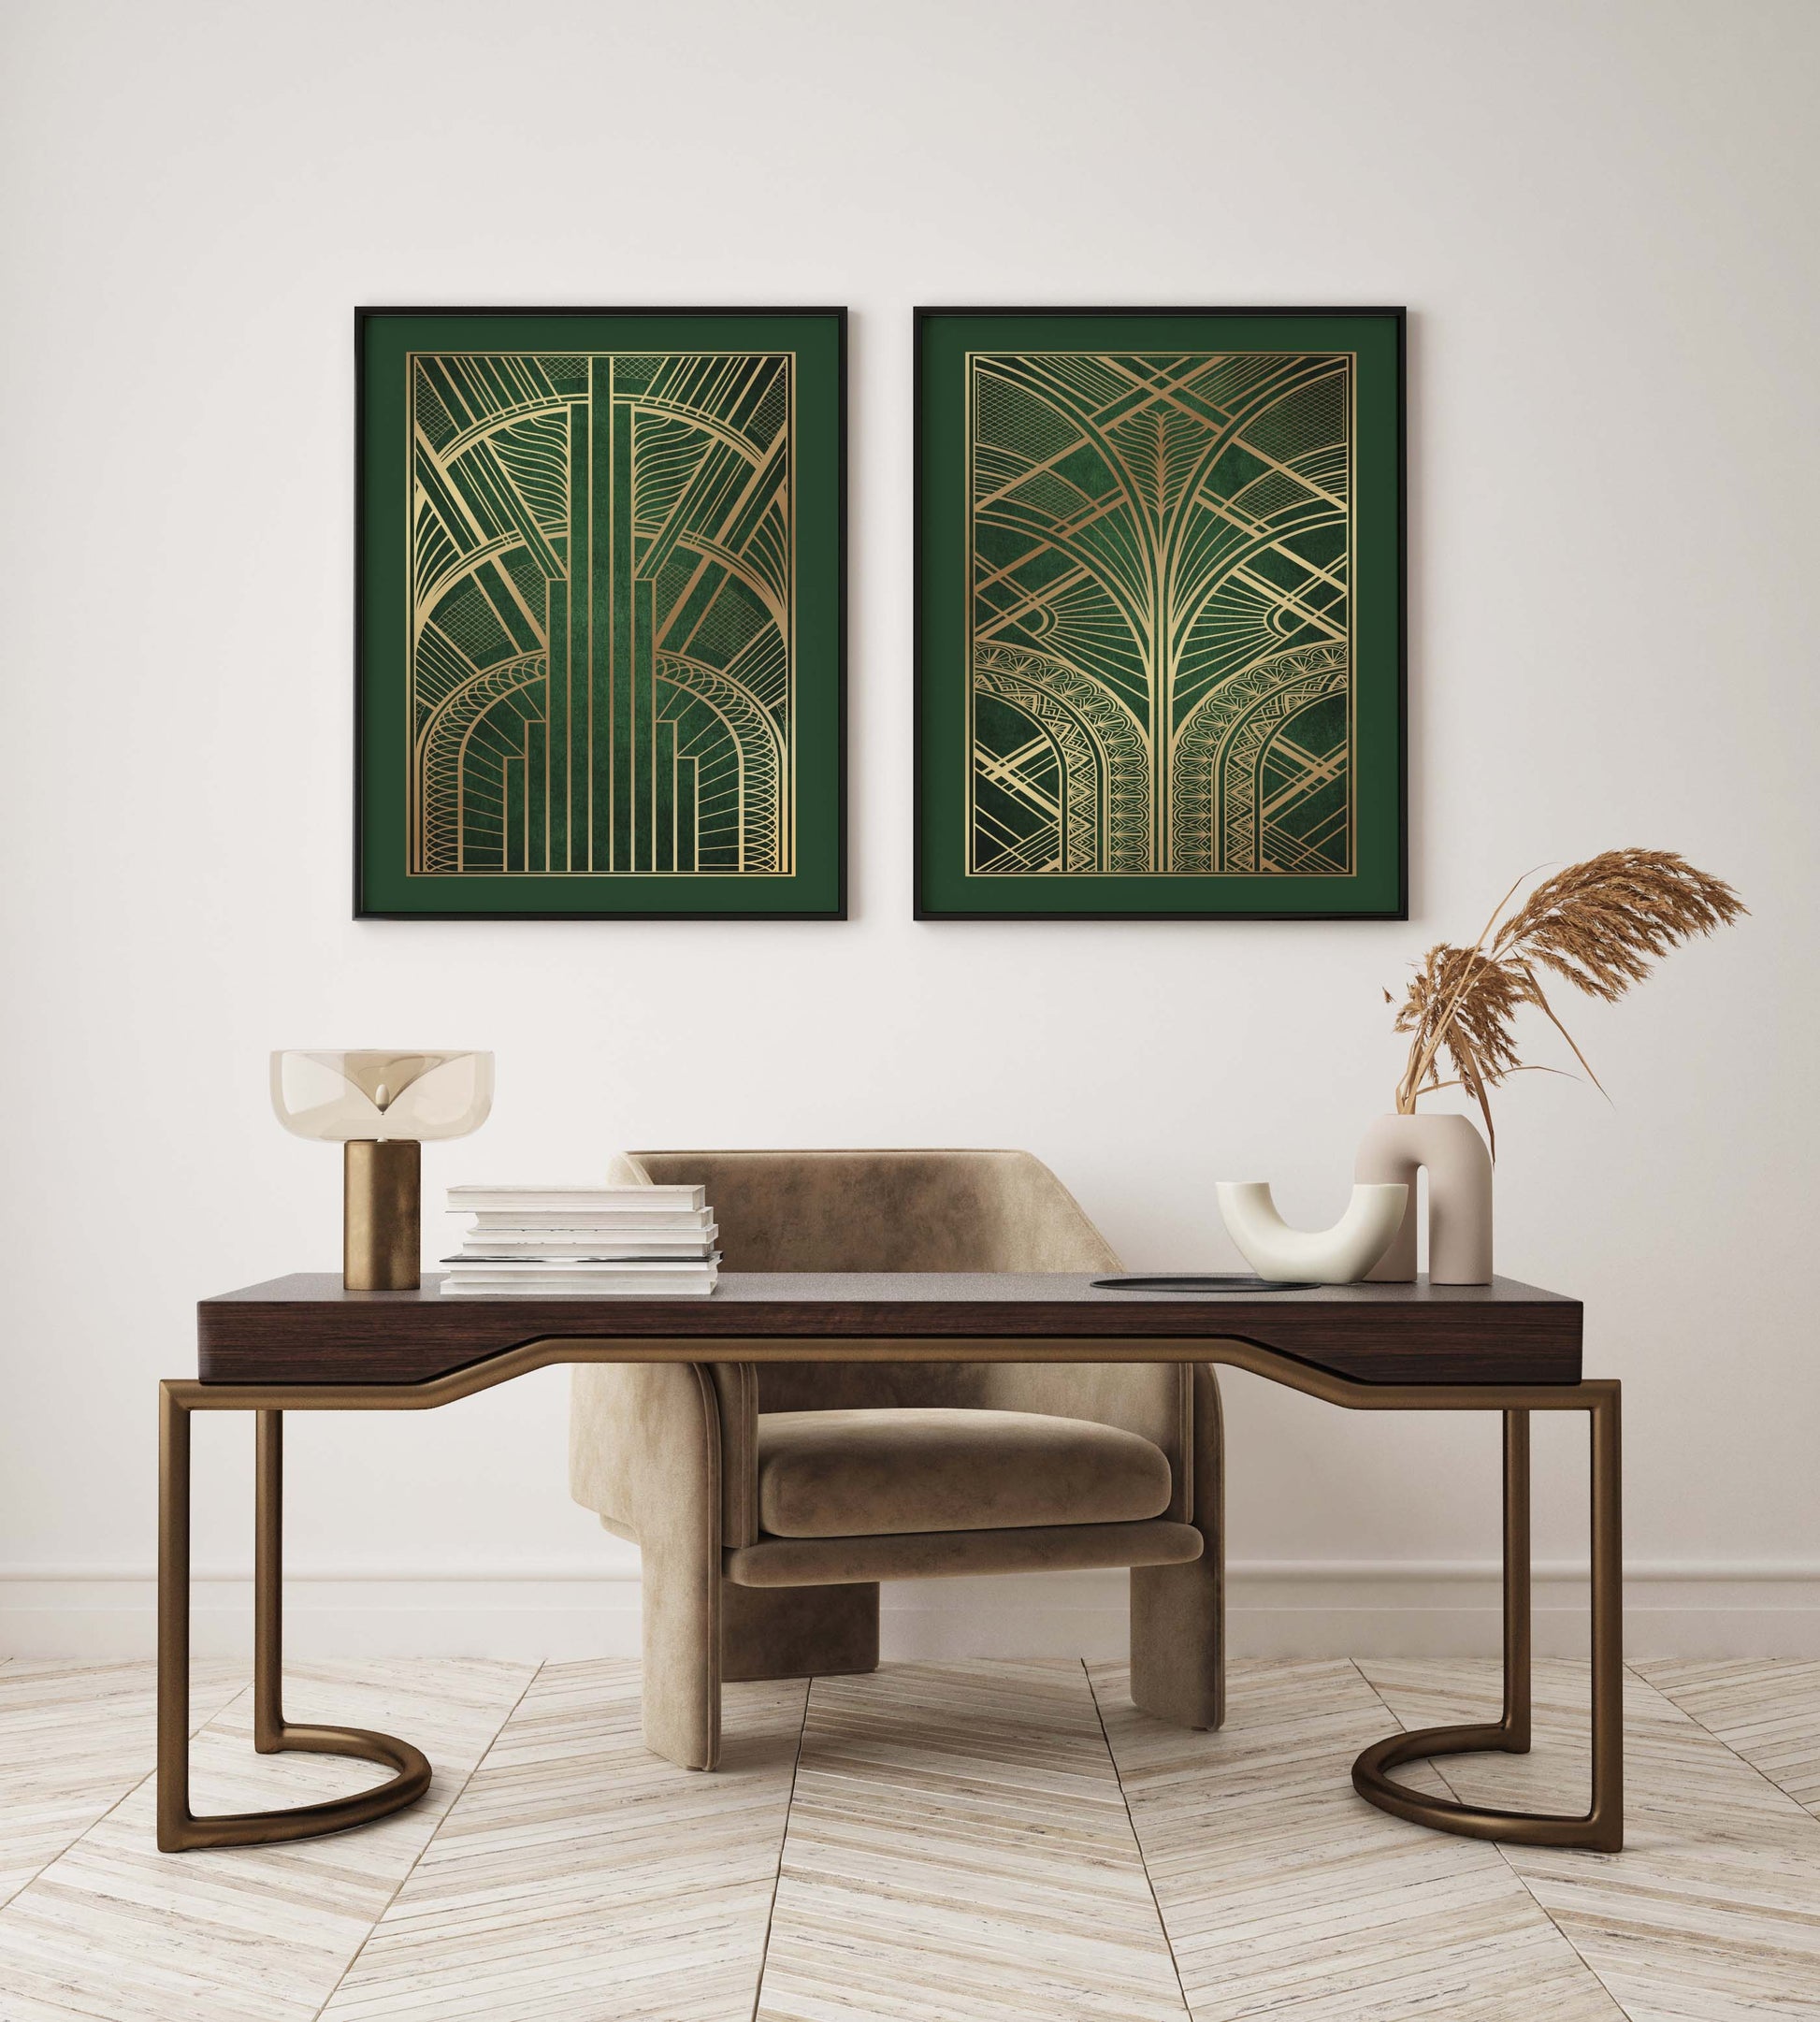 Green and gold art deco posters, set of 2 prints